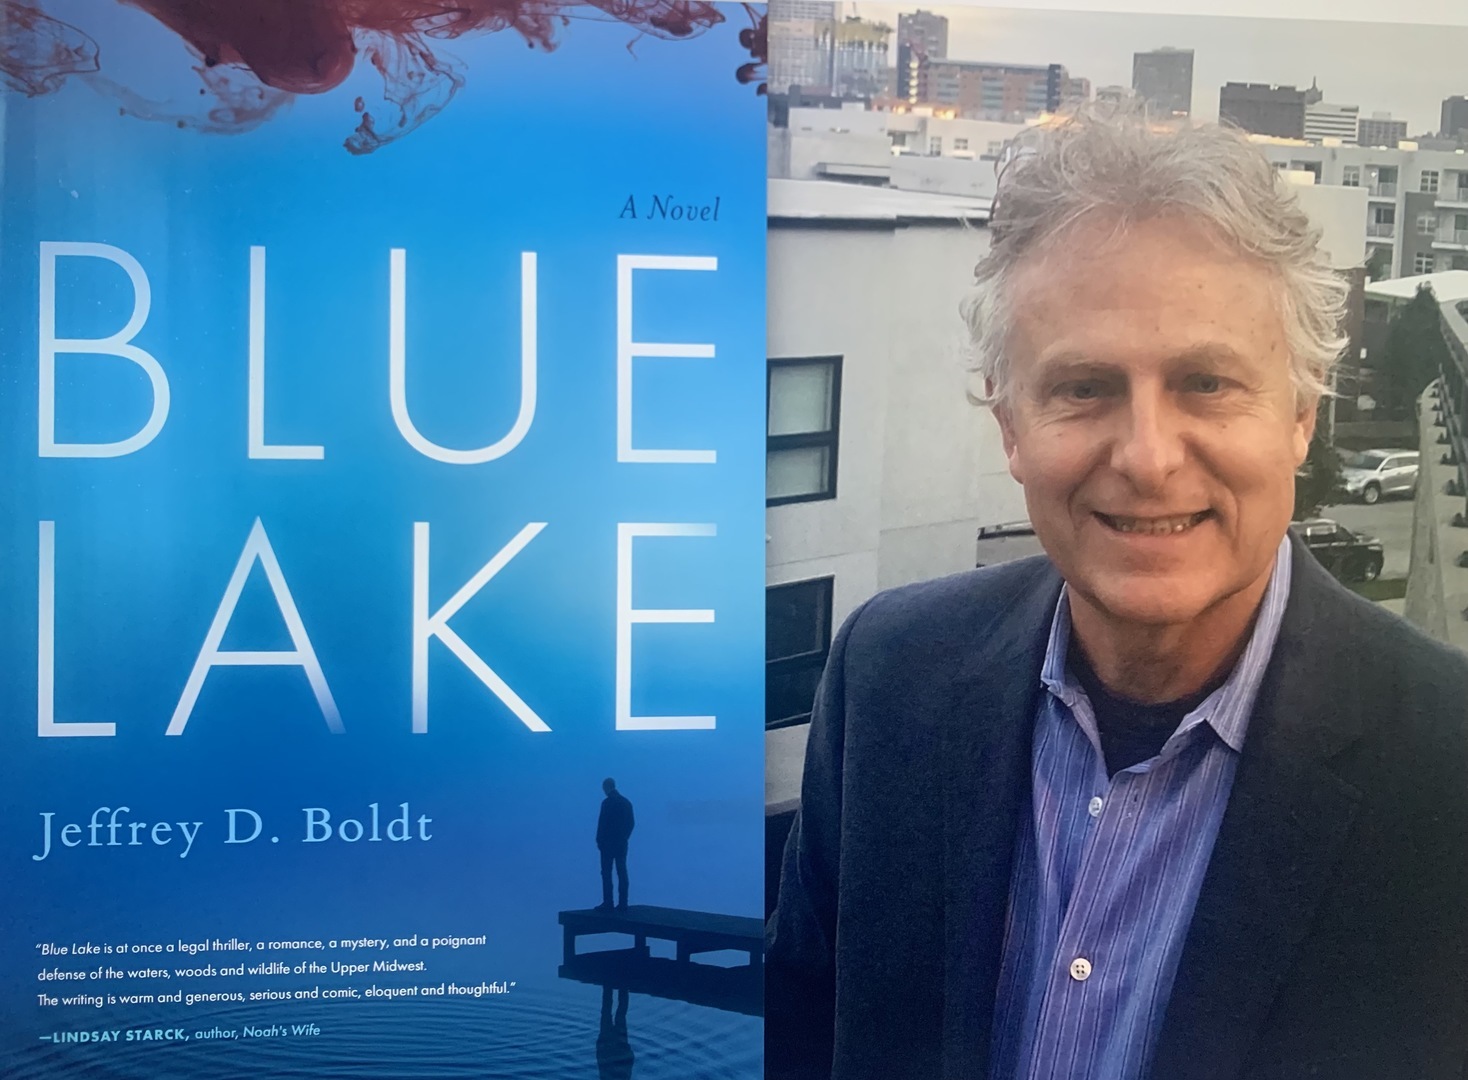 Book Launch: Blue Lake, a novel by Jeffrey D. Boldt, Madison, Wisconsin, United States